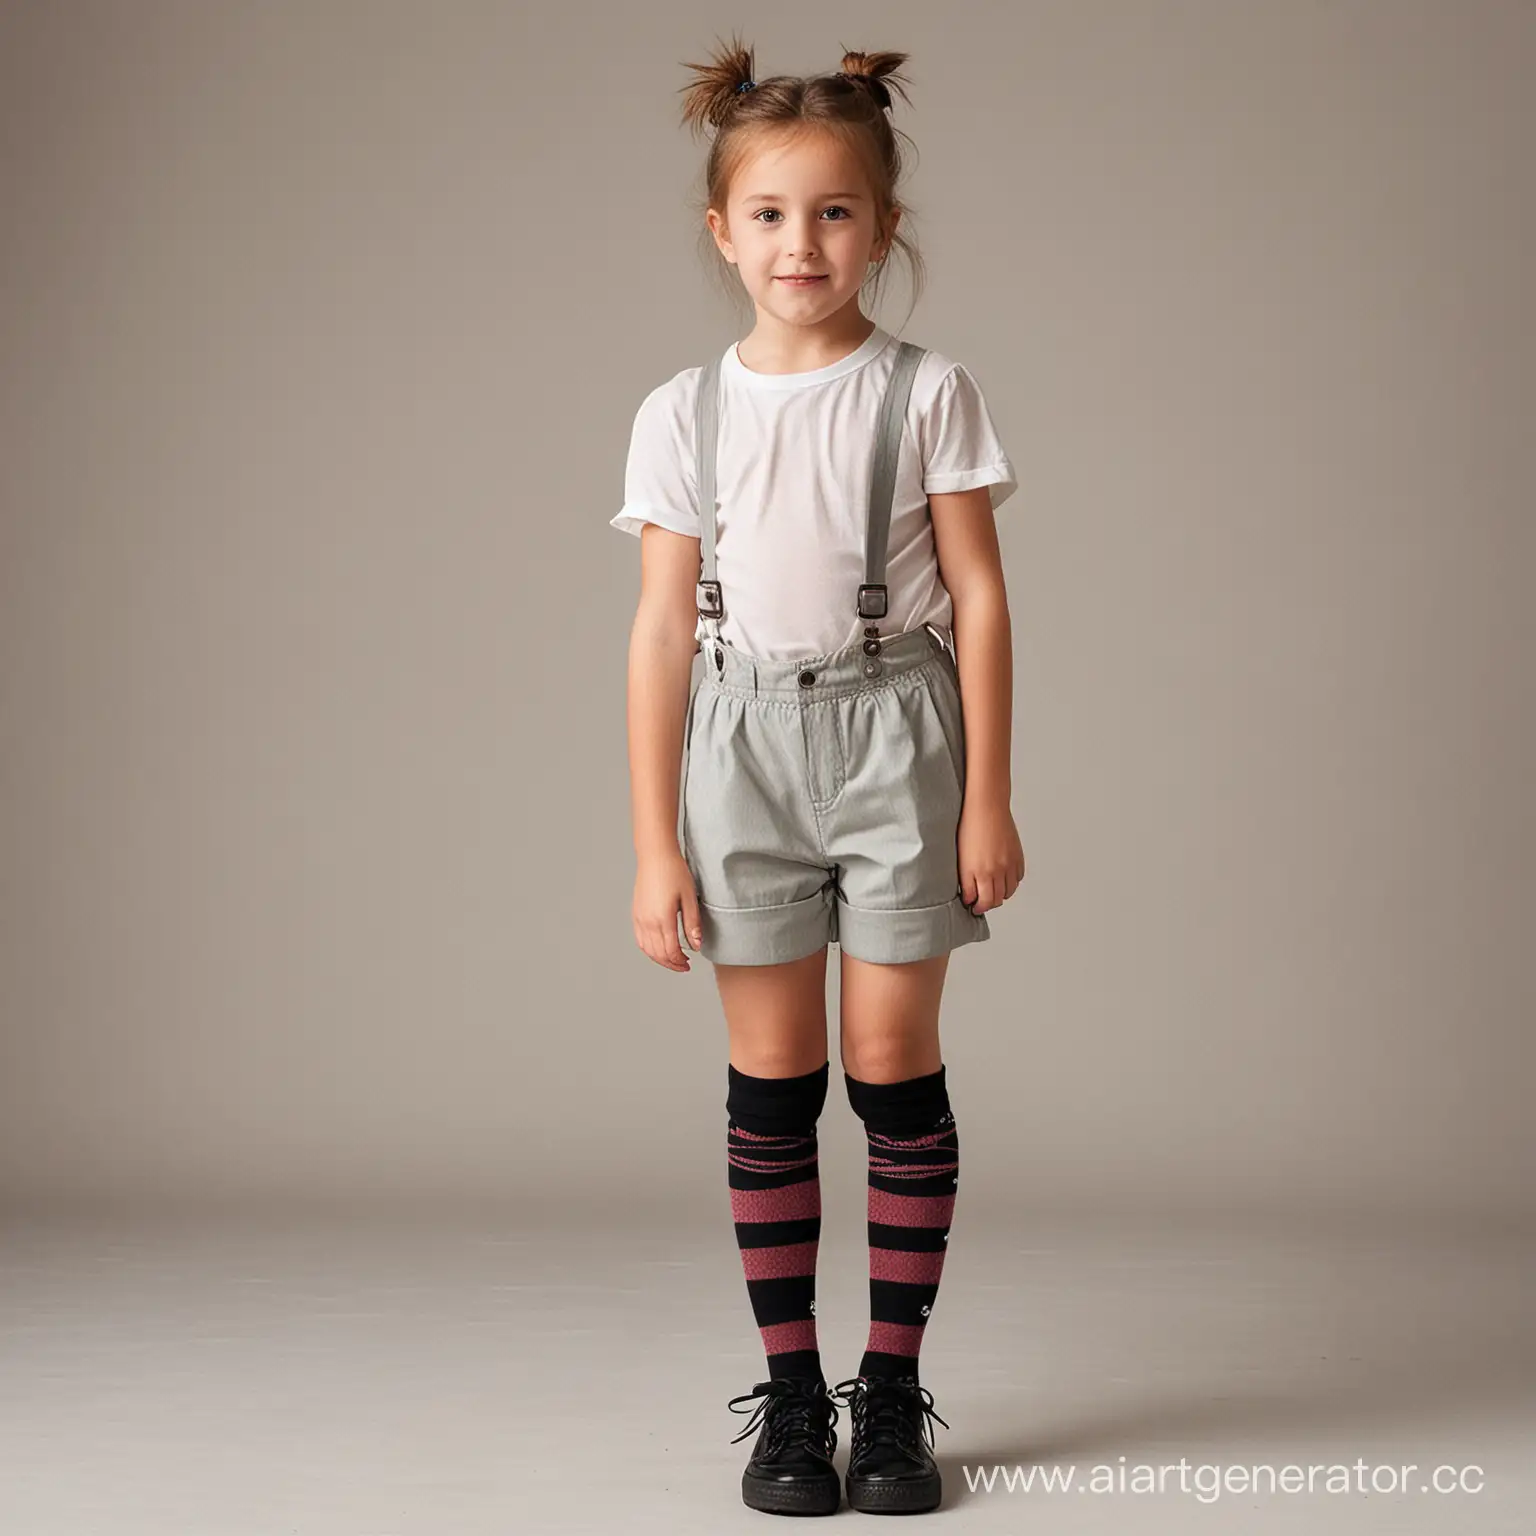 Adorable-Little-Girl-in-Long-Shorts-and-Knee-Socks